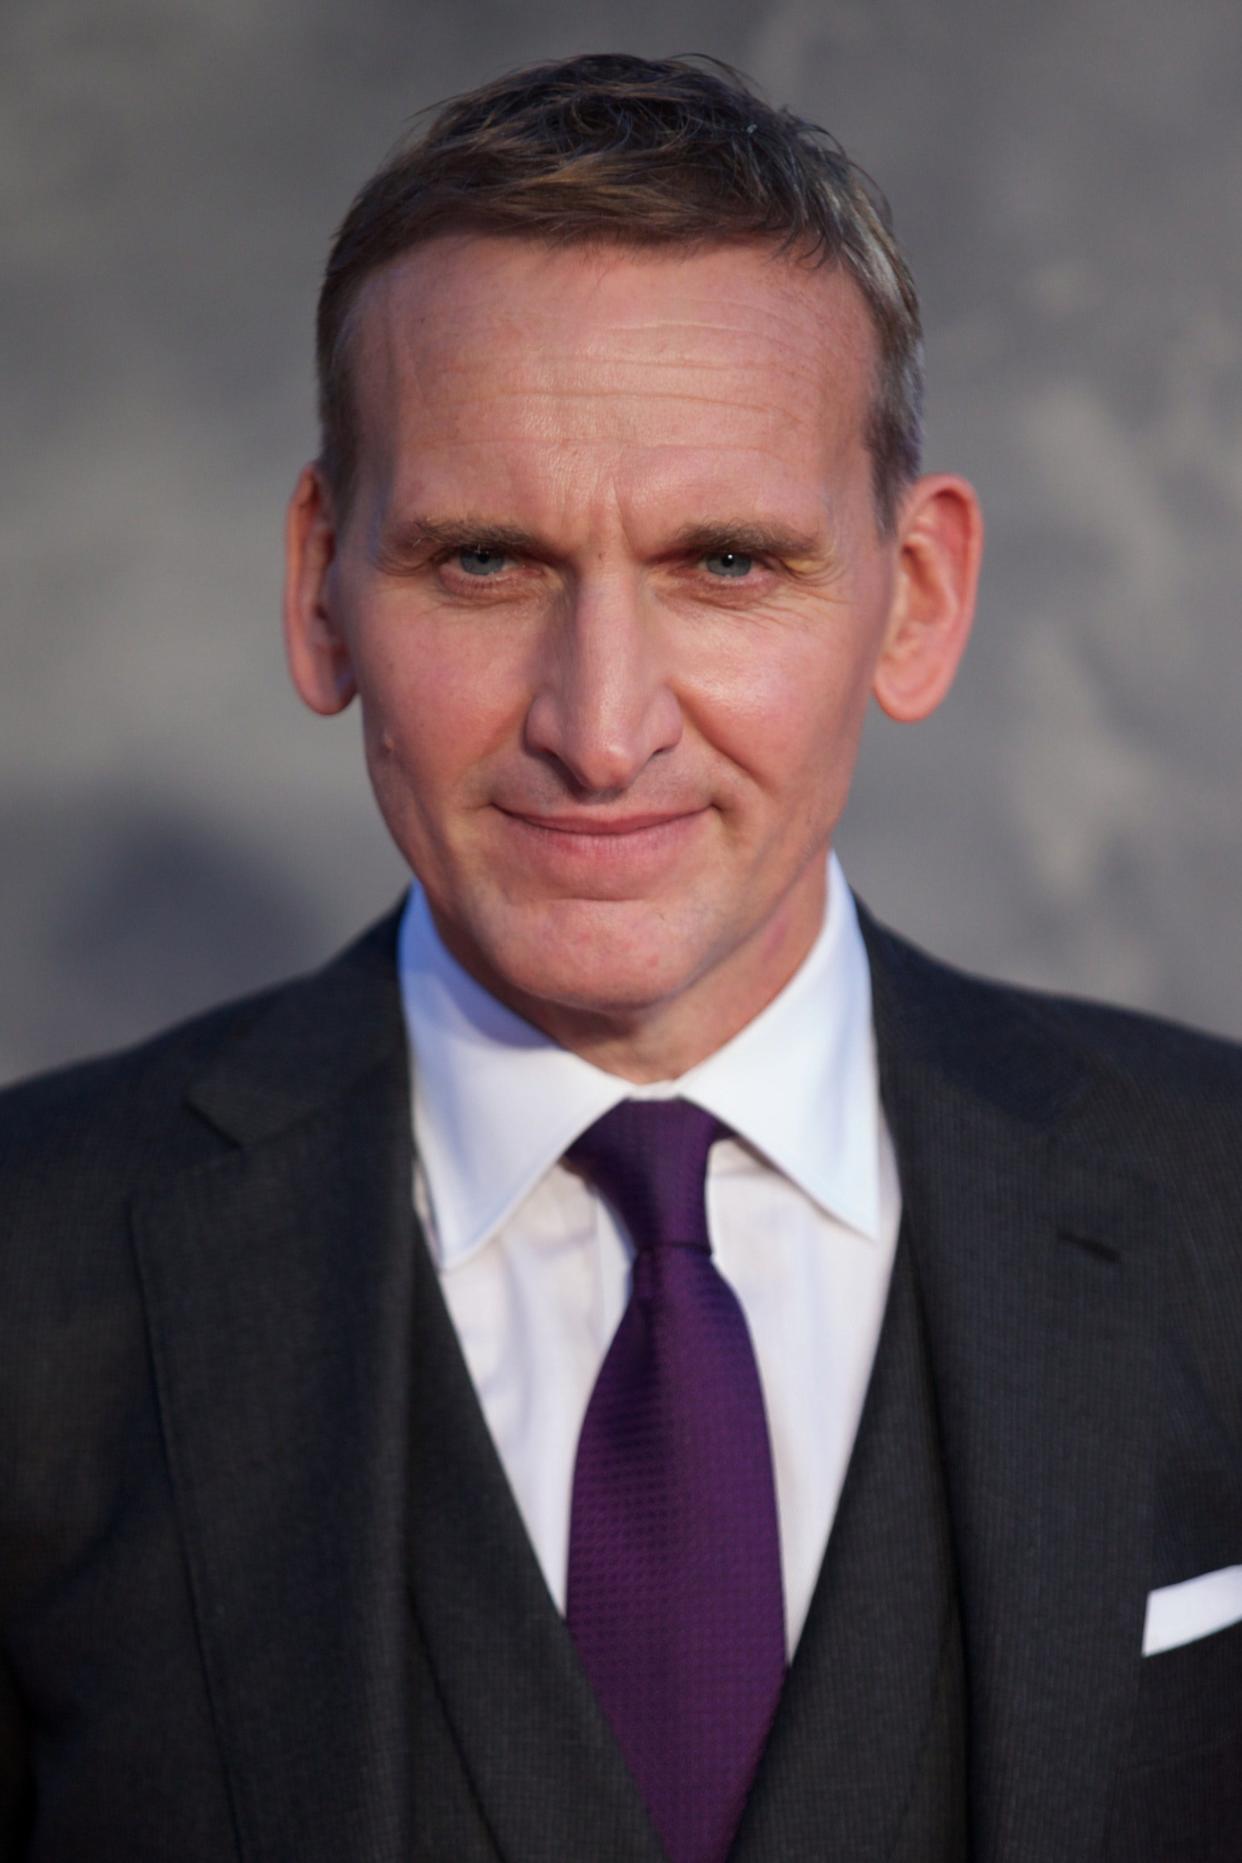 Christopher Eccleston alleged a co-star once falsely accused him of "copping a feel" during a sex scene.